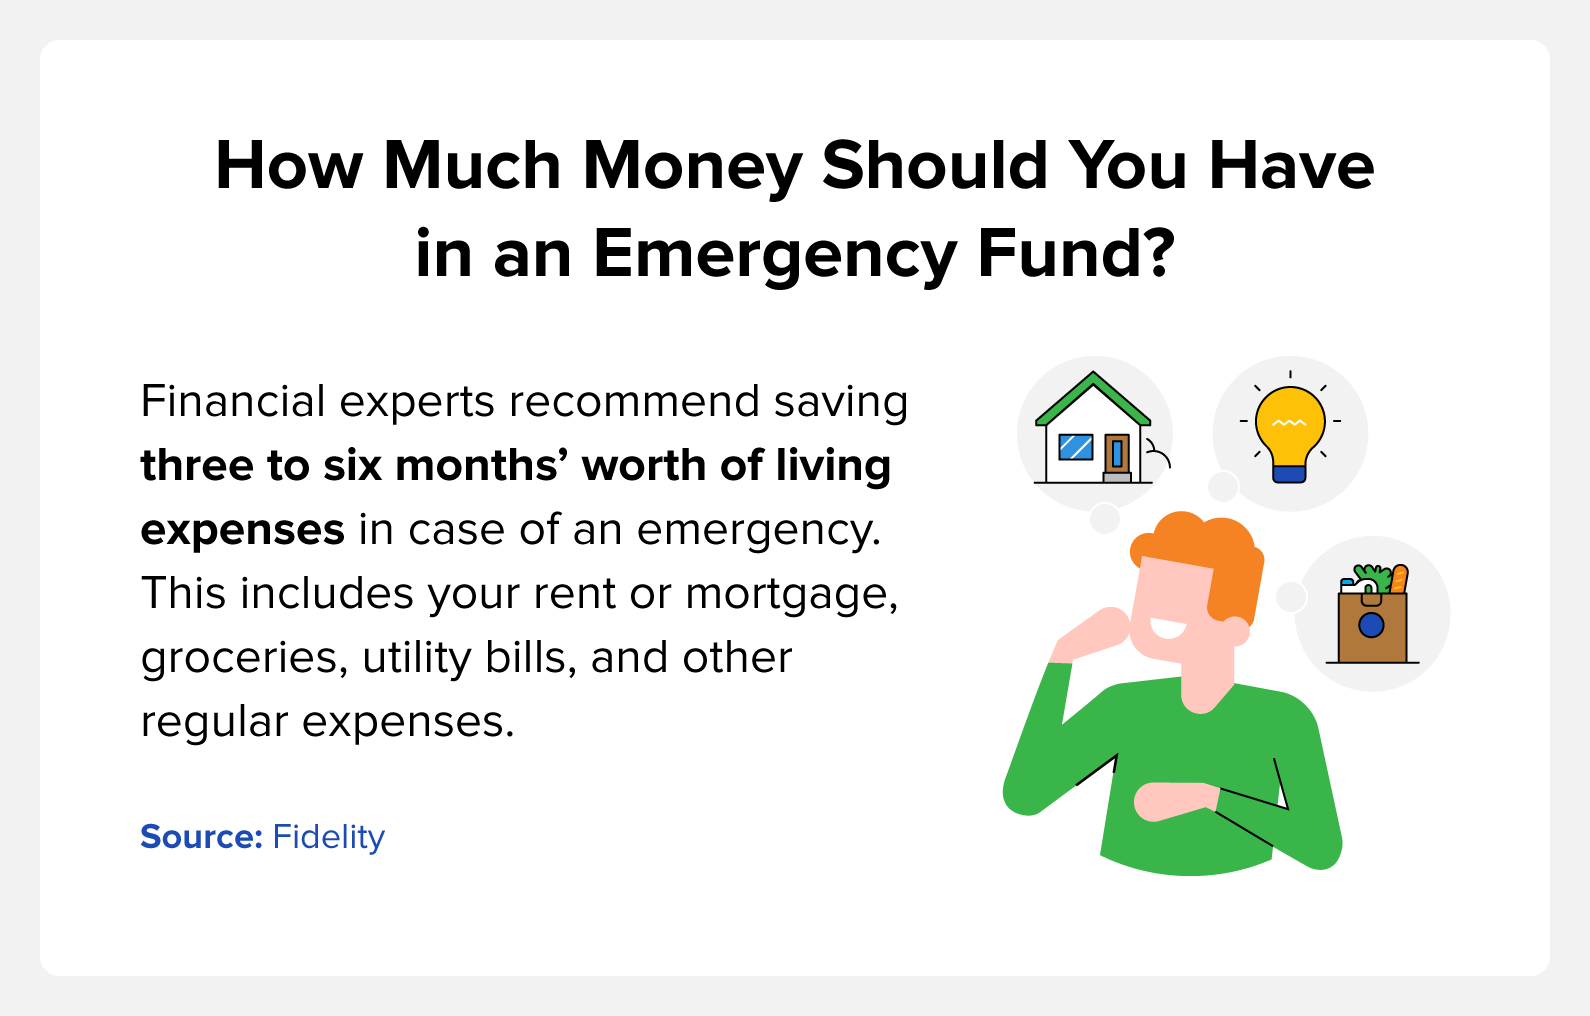 how much money should you have in an emergency fund?